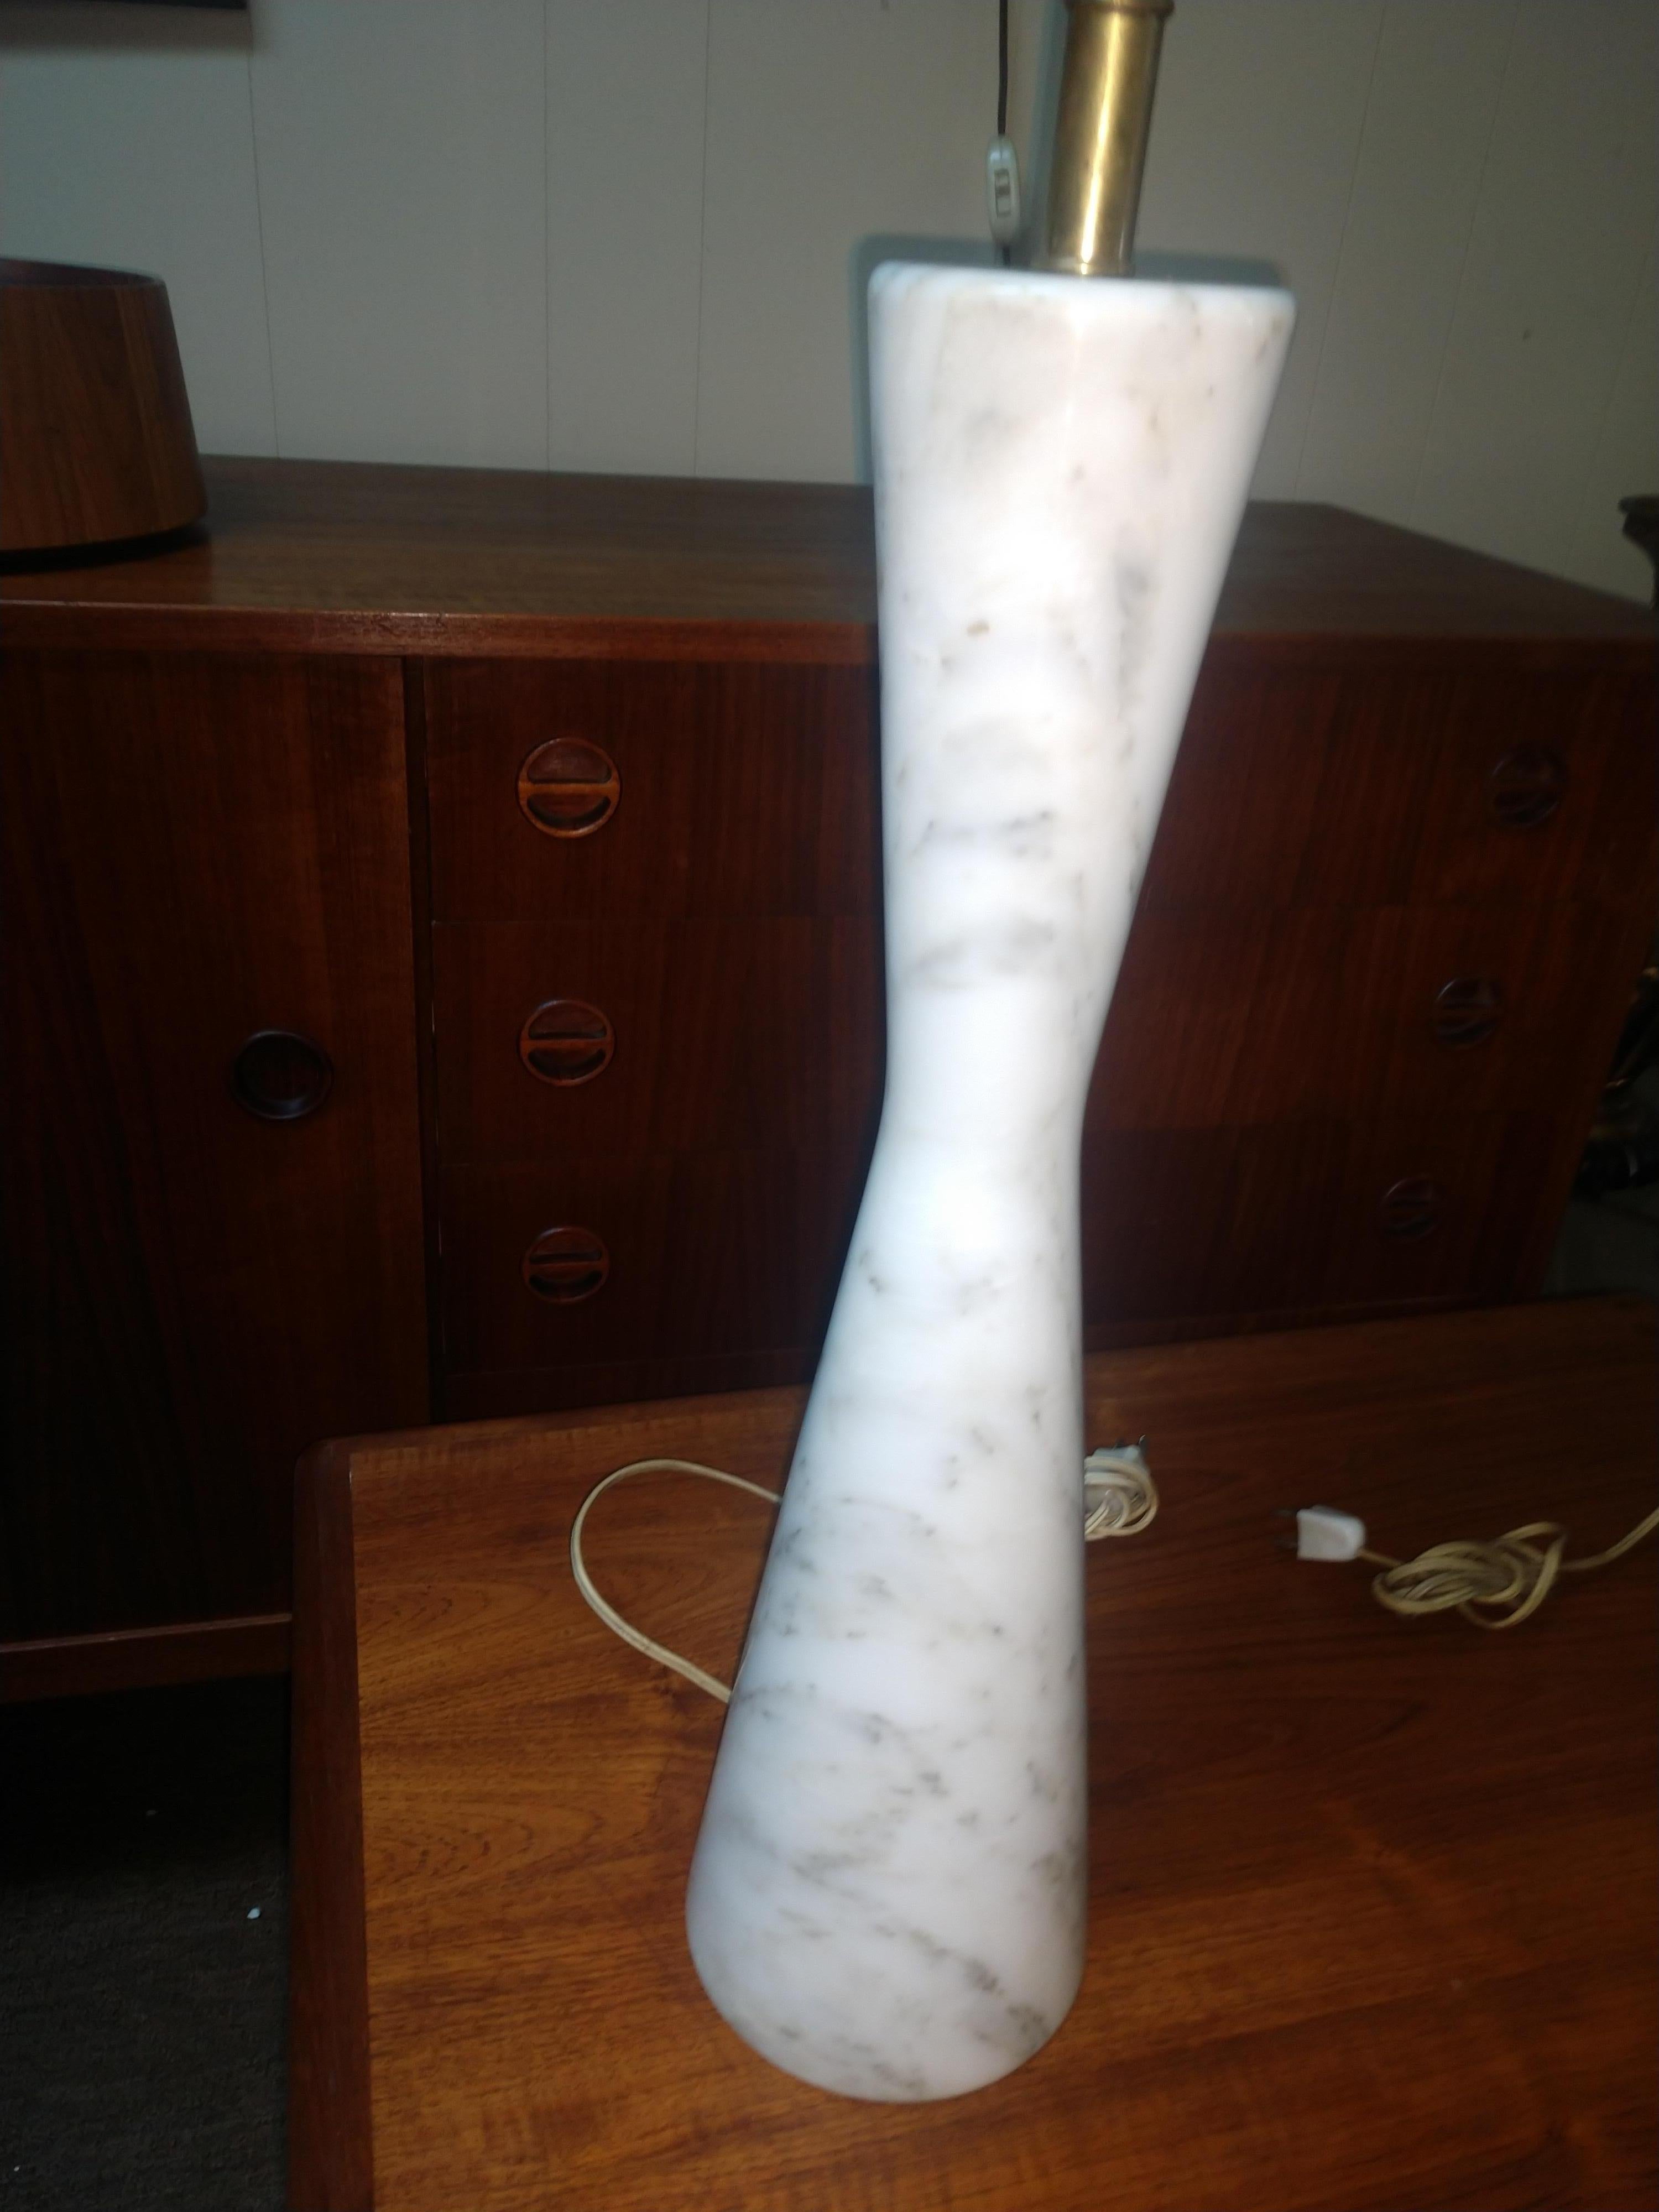 Fabulous and hard to find in an hour glass shape. Tall and slender 25 inch to the top of the socket by 5 3/8 diameter at the base. In excellent vintage condition with no chips or cracks to marble. Original wiring which is sound, harps are